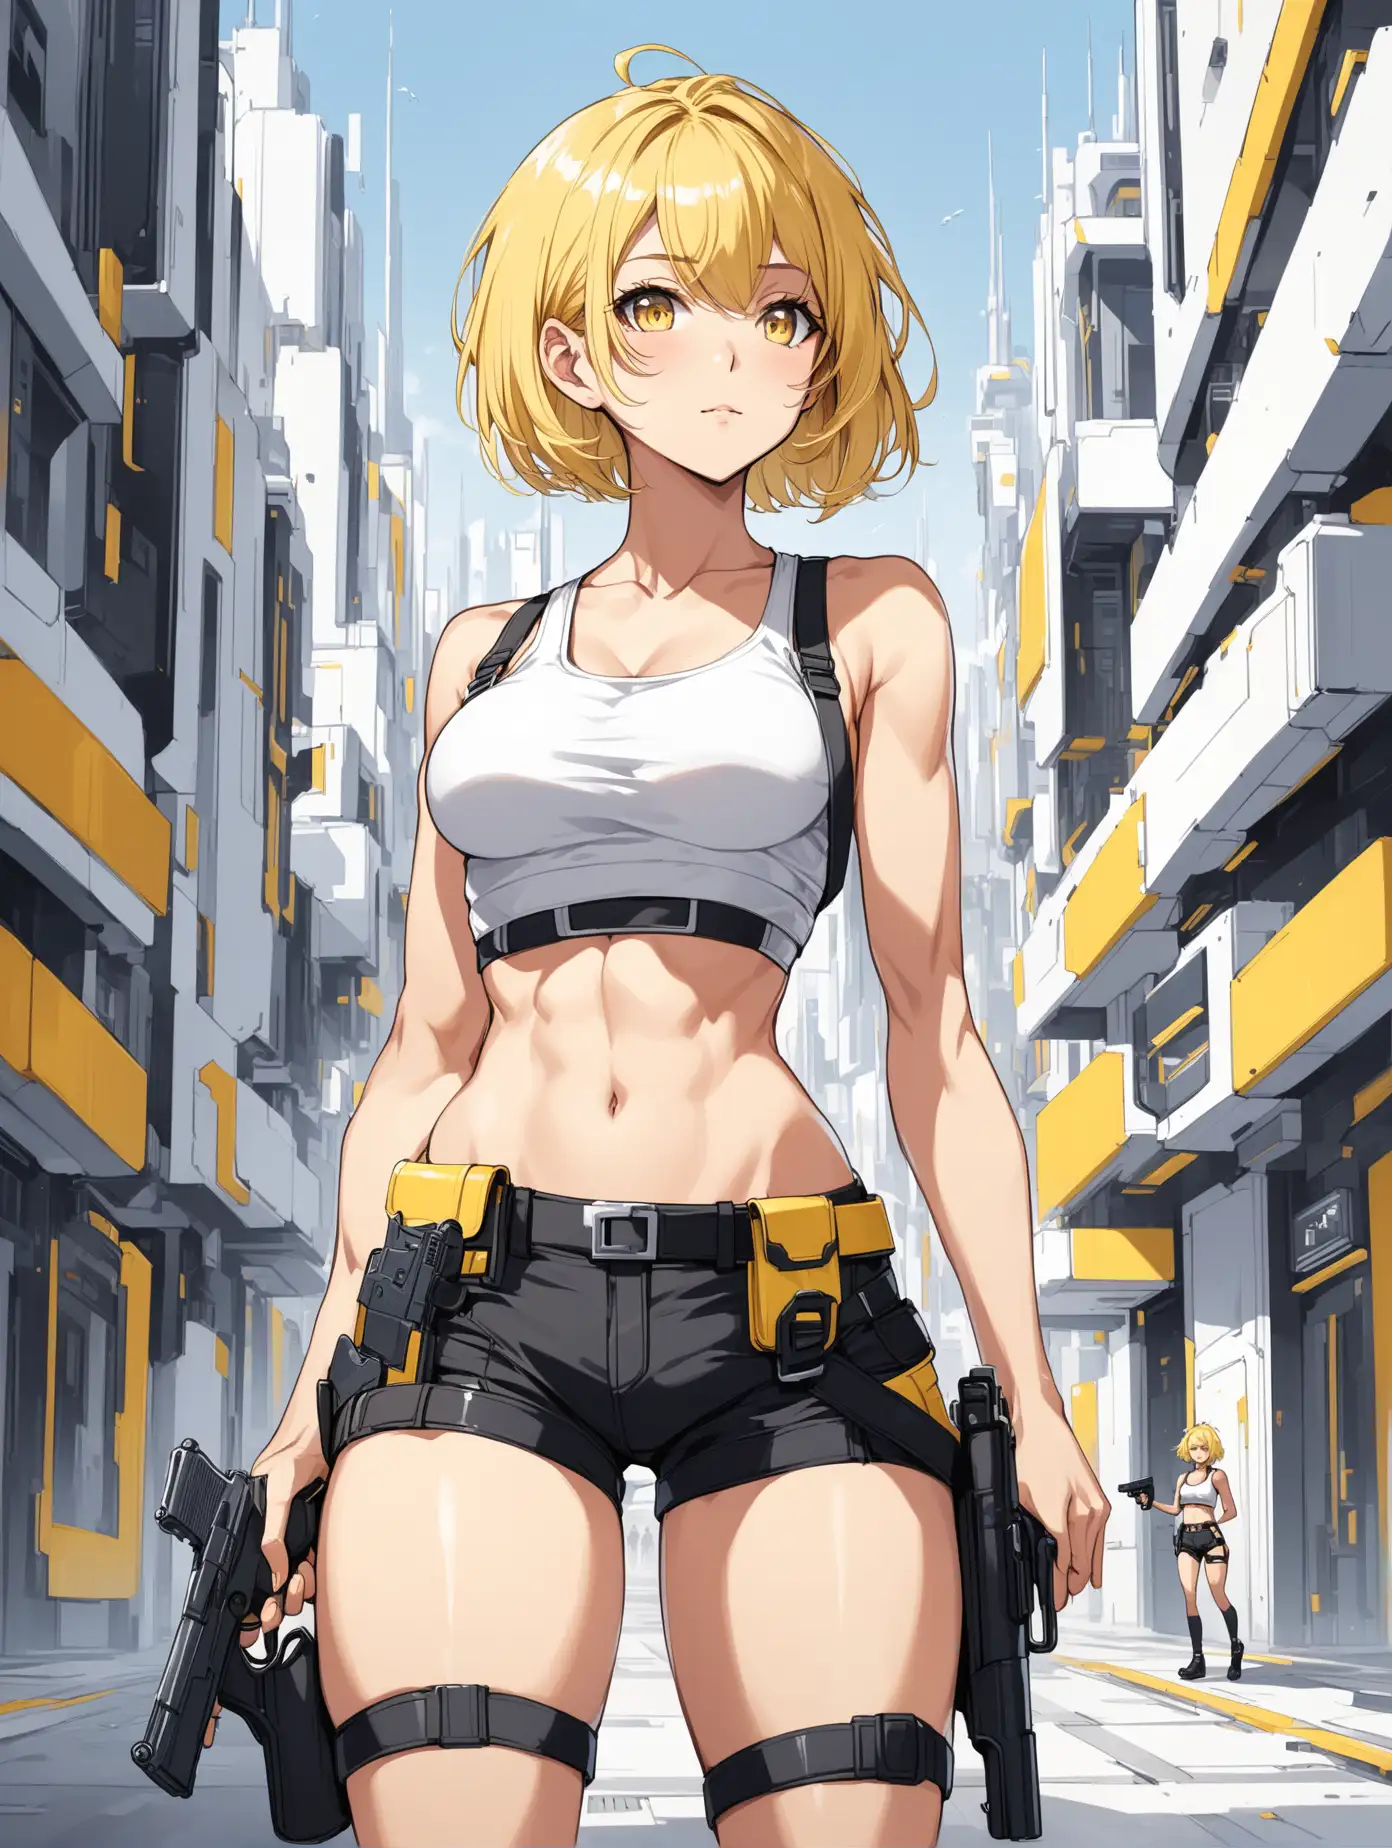 sexy fit 24 year old hero girl, short chin length yellow hair, holding handguns in futuristic town, toned body, short white tank top, sexy toned midriff, wearing suspenders, black shorts, holsters on each thigh, yellow black white 3 color minimal design